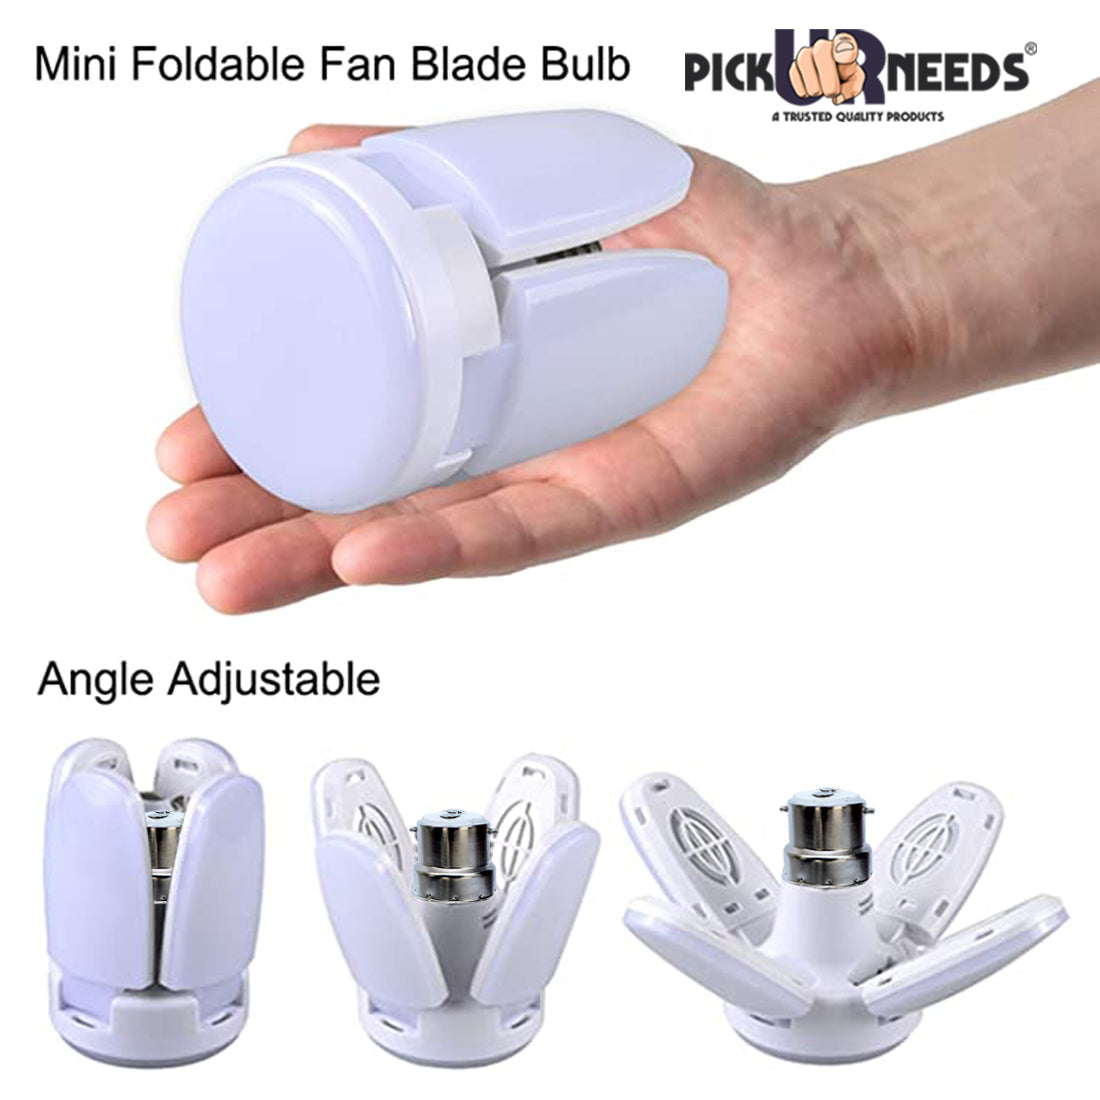 Pick Ur Needs Foldable Fan LED Light Blade Bulb Bright Angle Adjustable Home Ceiling(Pack of 2)